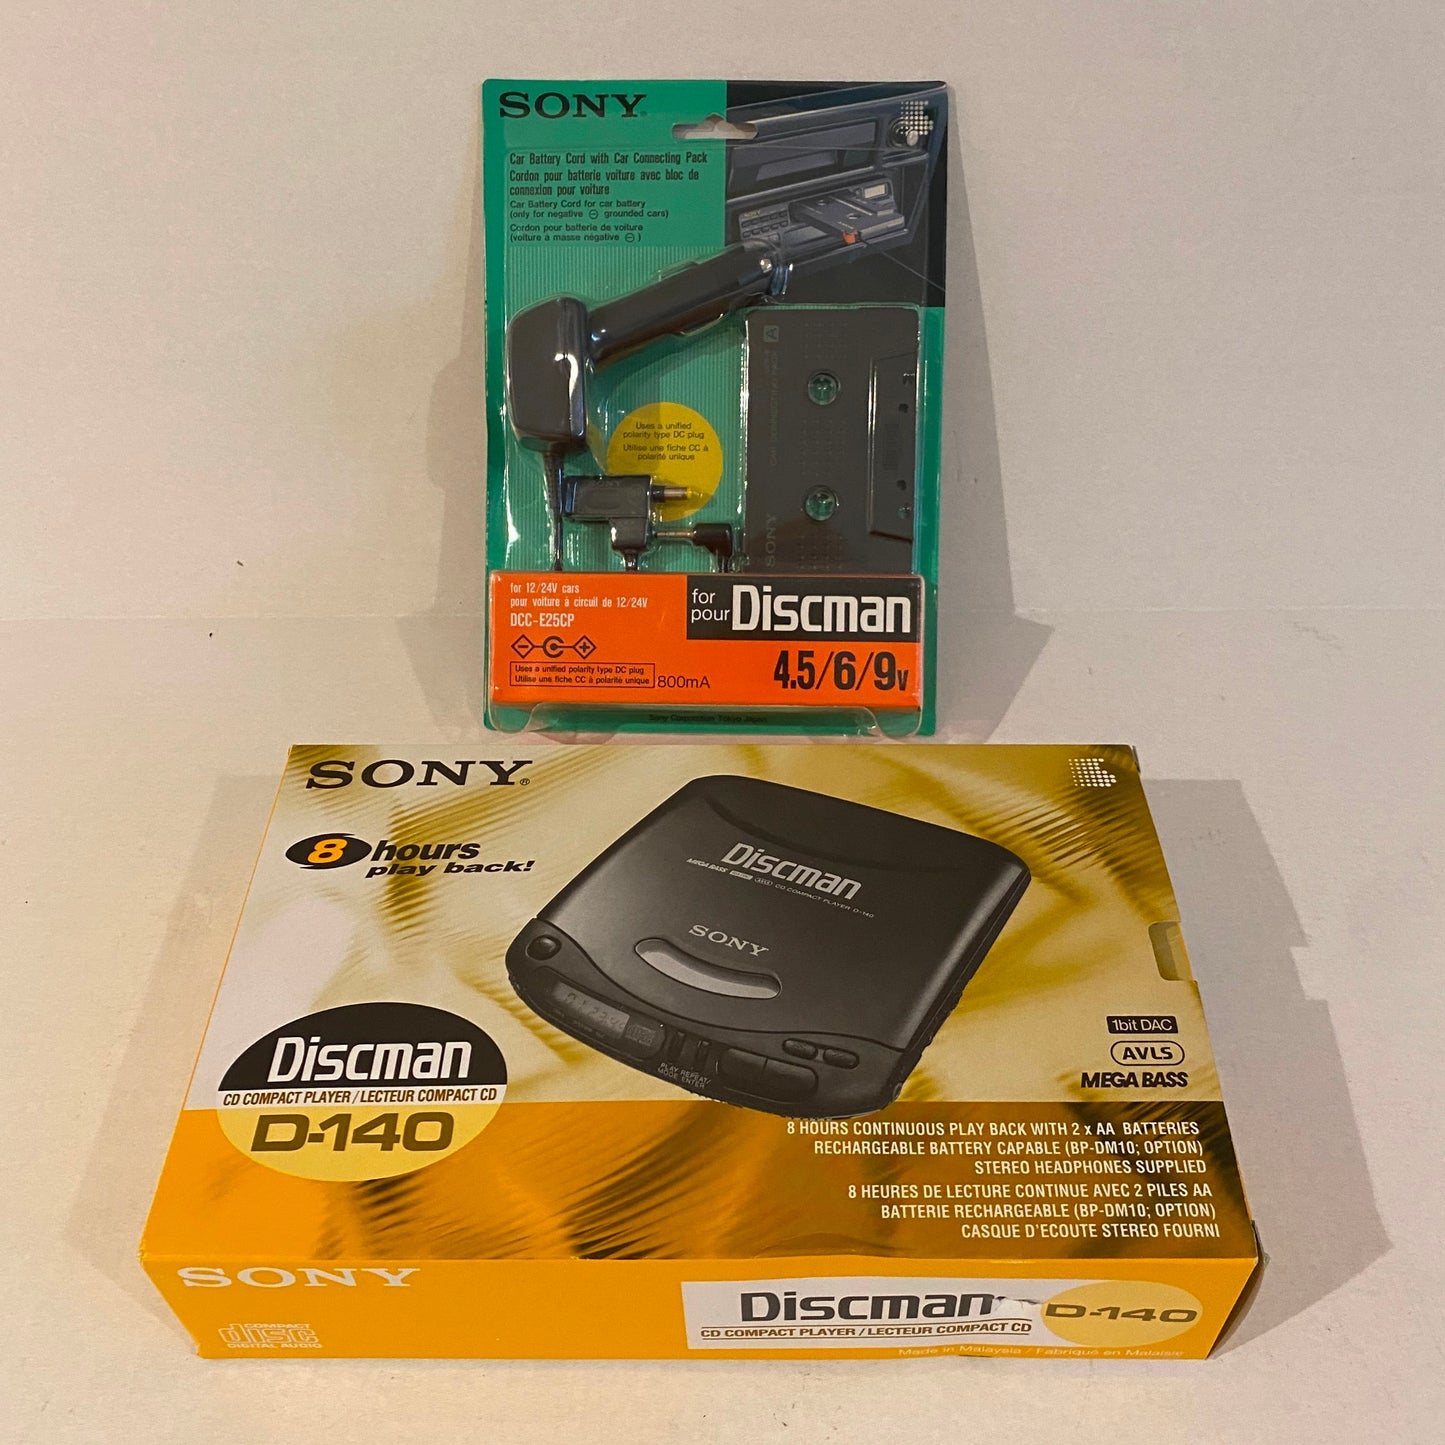 New - Sony Discman CD Player D-140 and Car Adapter Kit